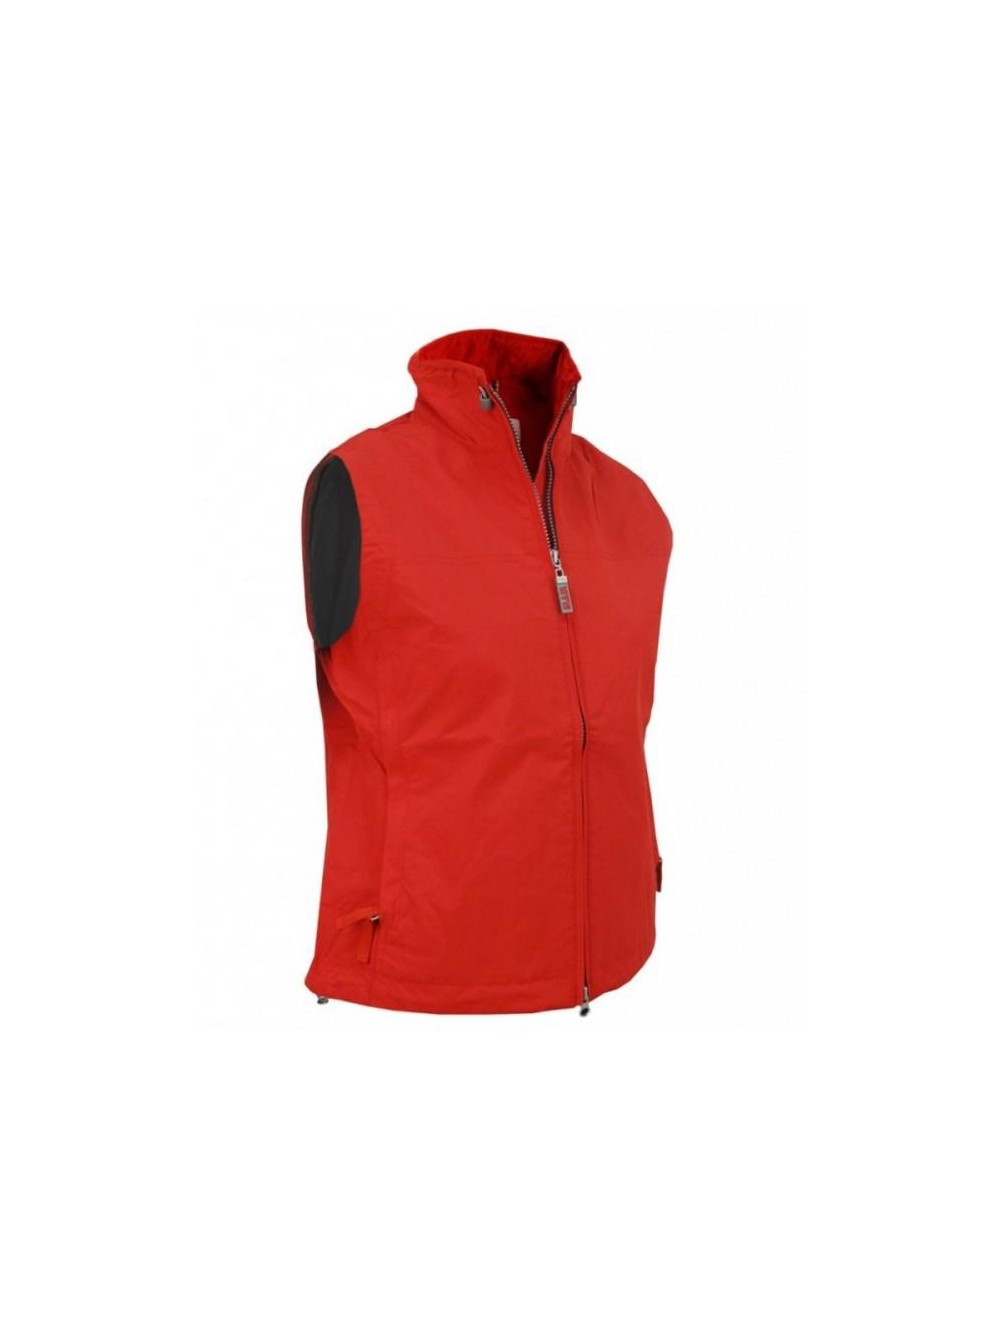 SLAM SUMMER SAILING VEST BRAND NEW   WITH TAGS RRP  £83 